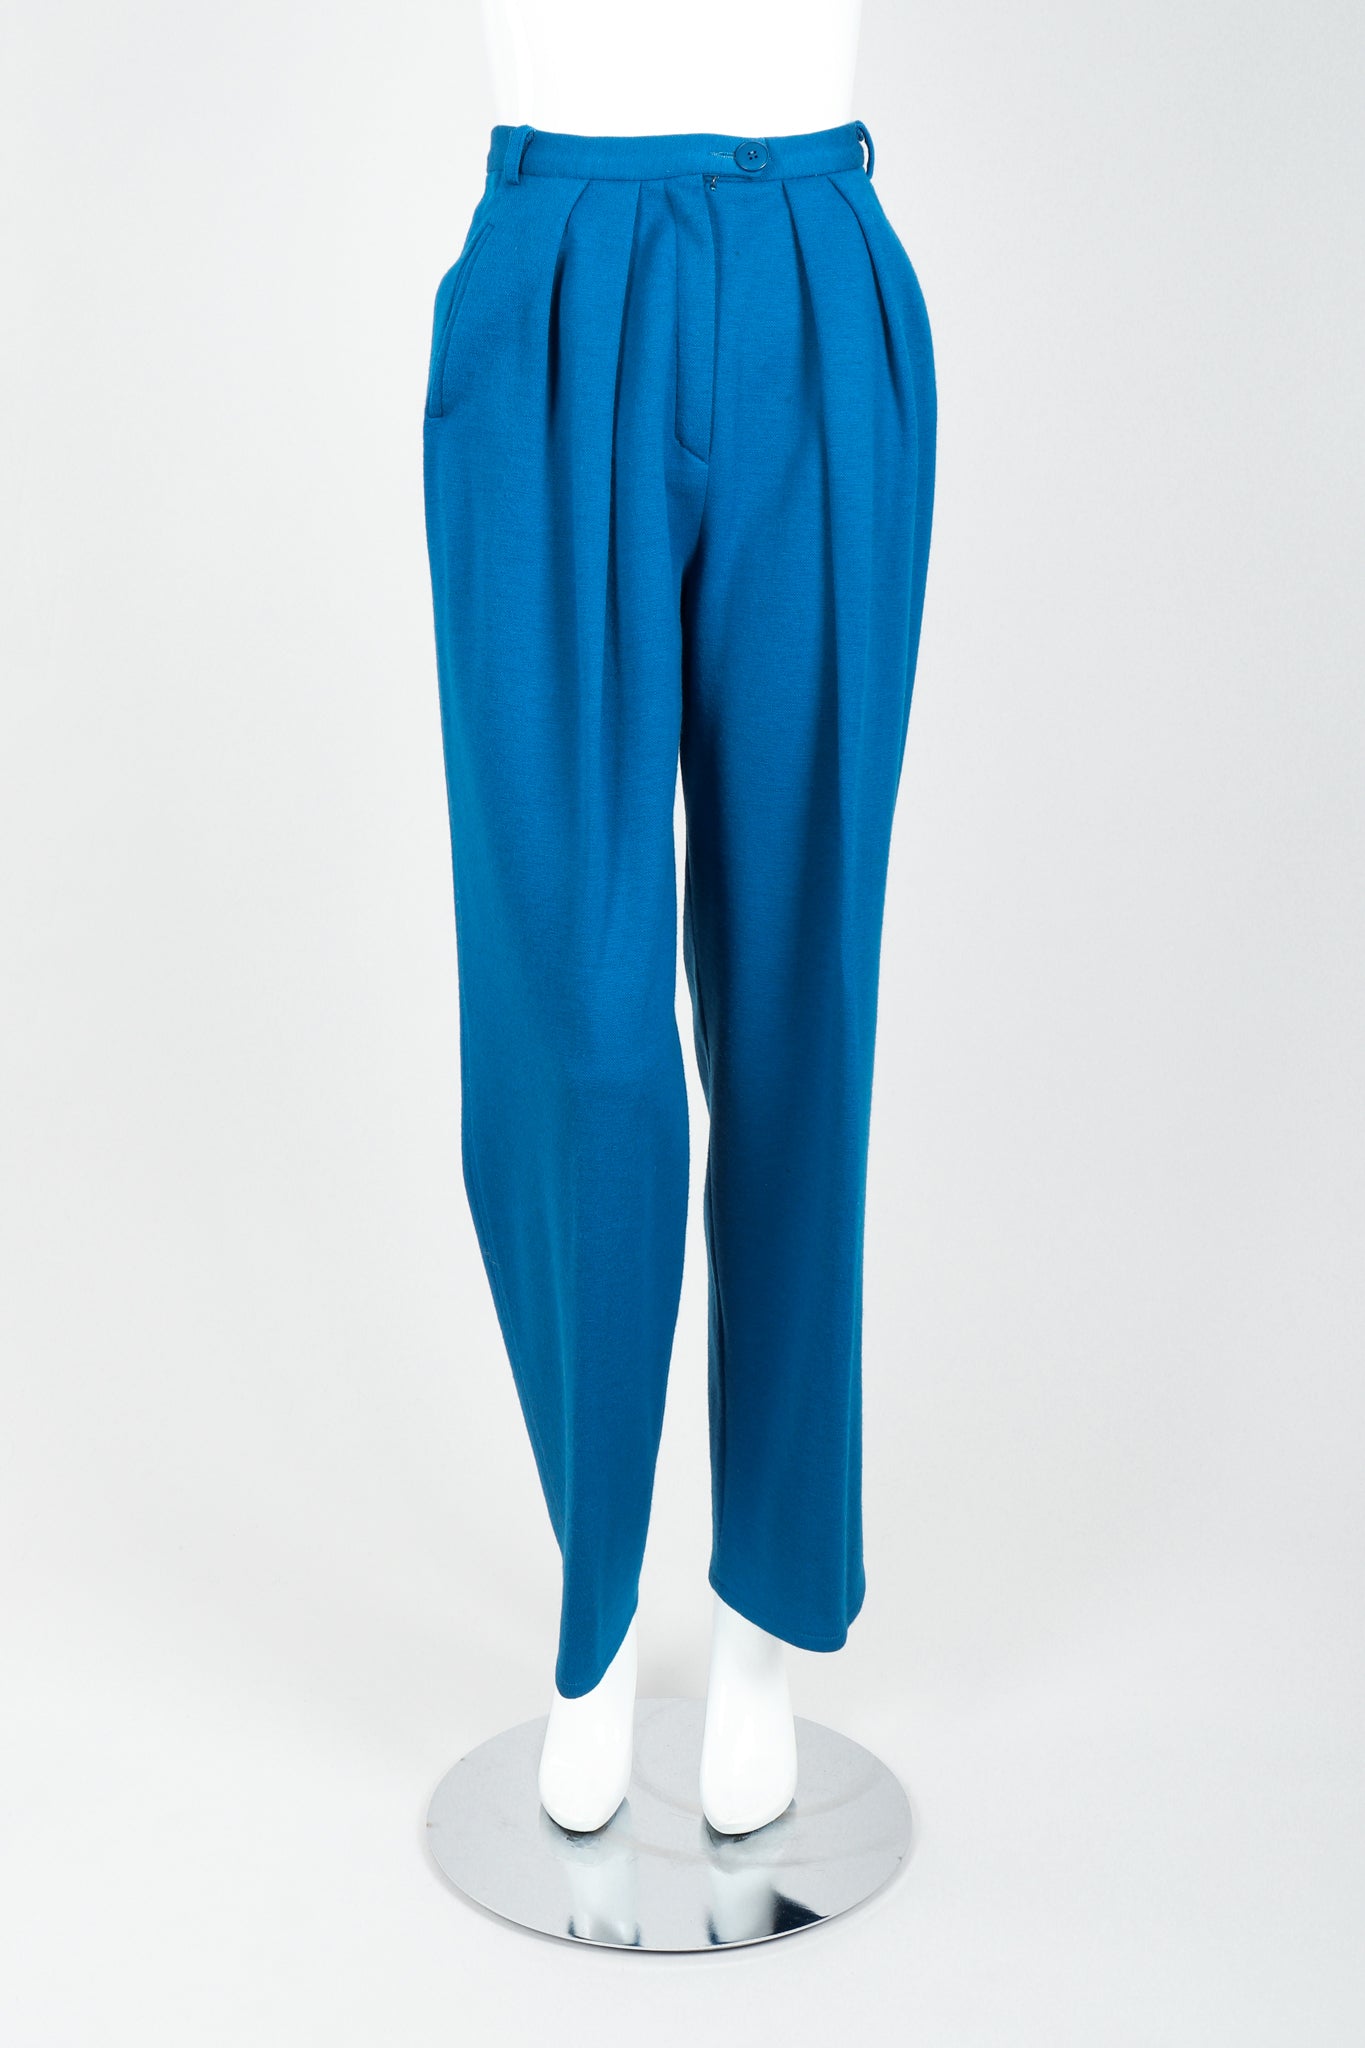 Vintage Sonia Rykiel Blue Knit Pleated Pant Set on Mannequin front at Recess